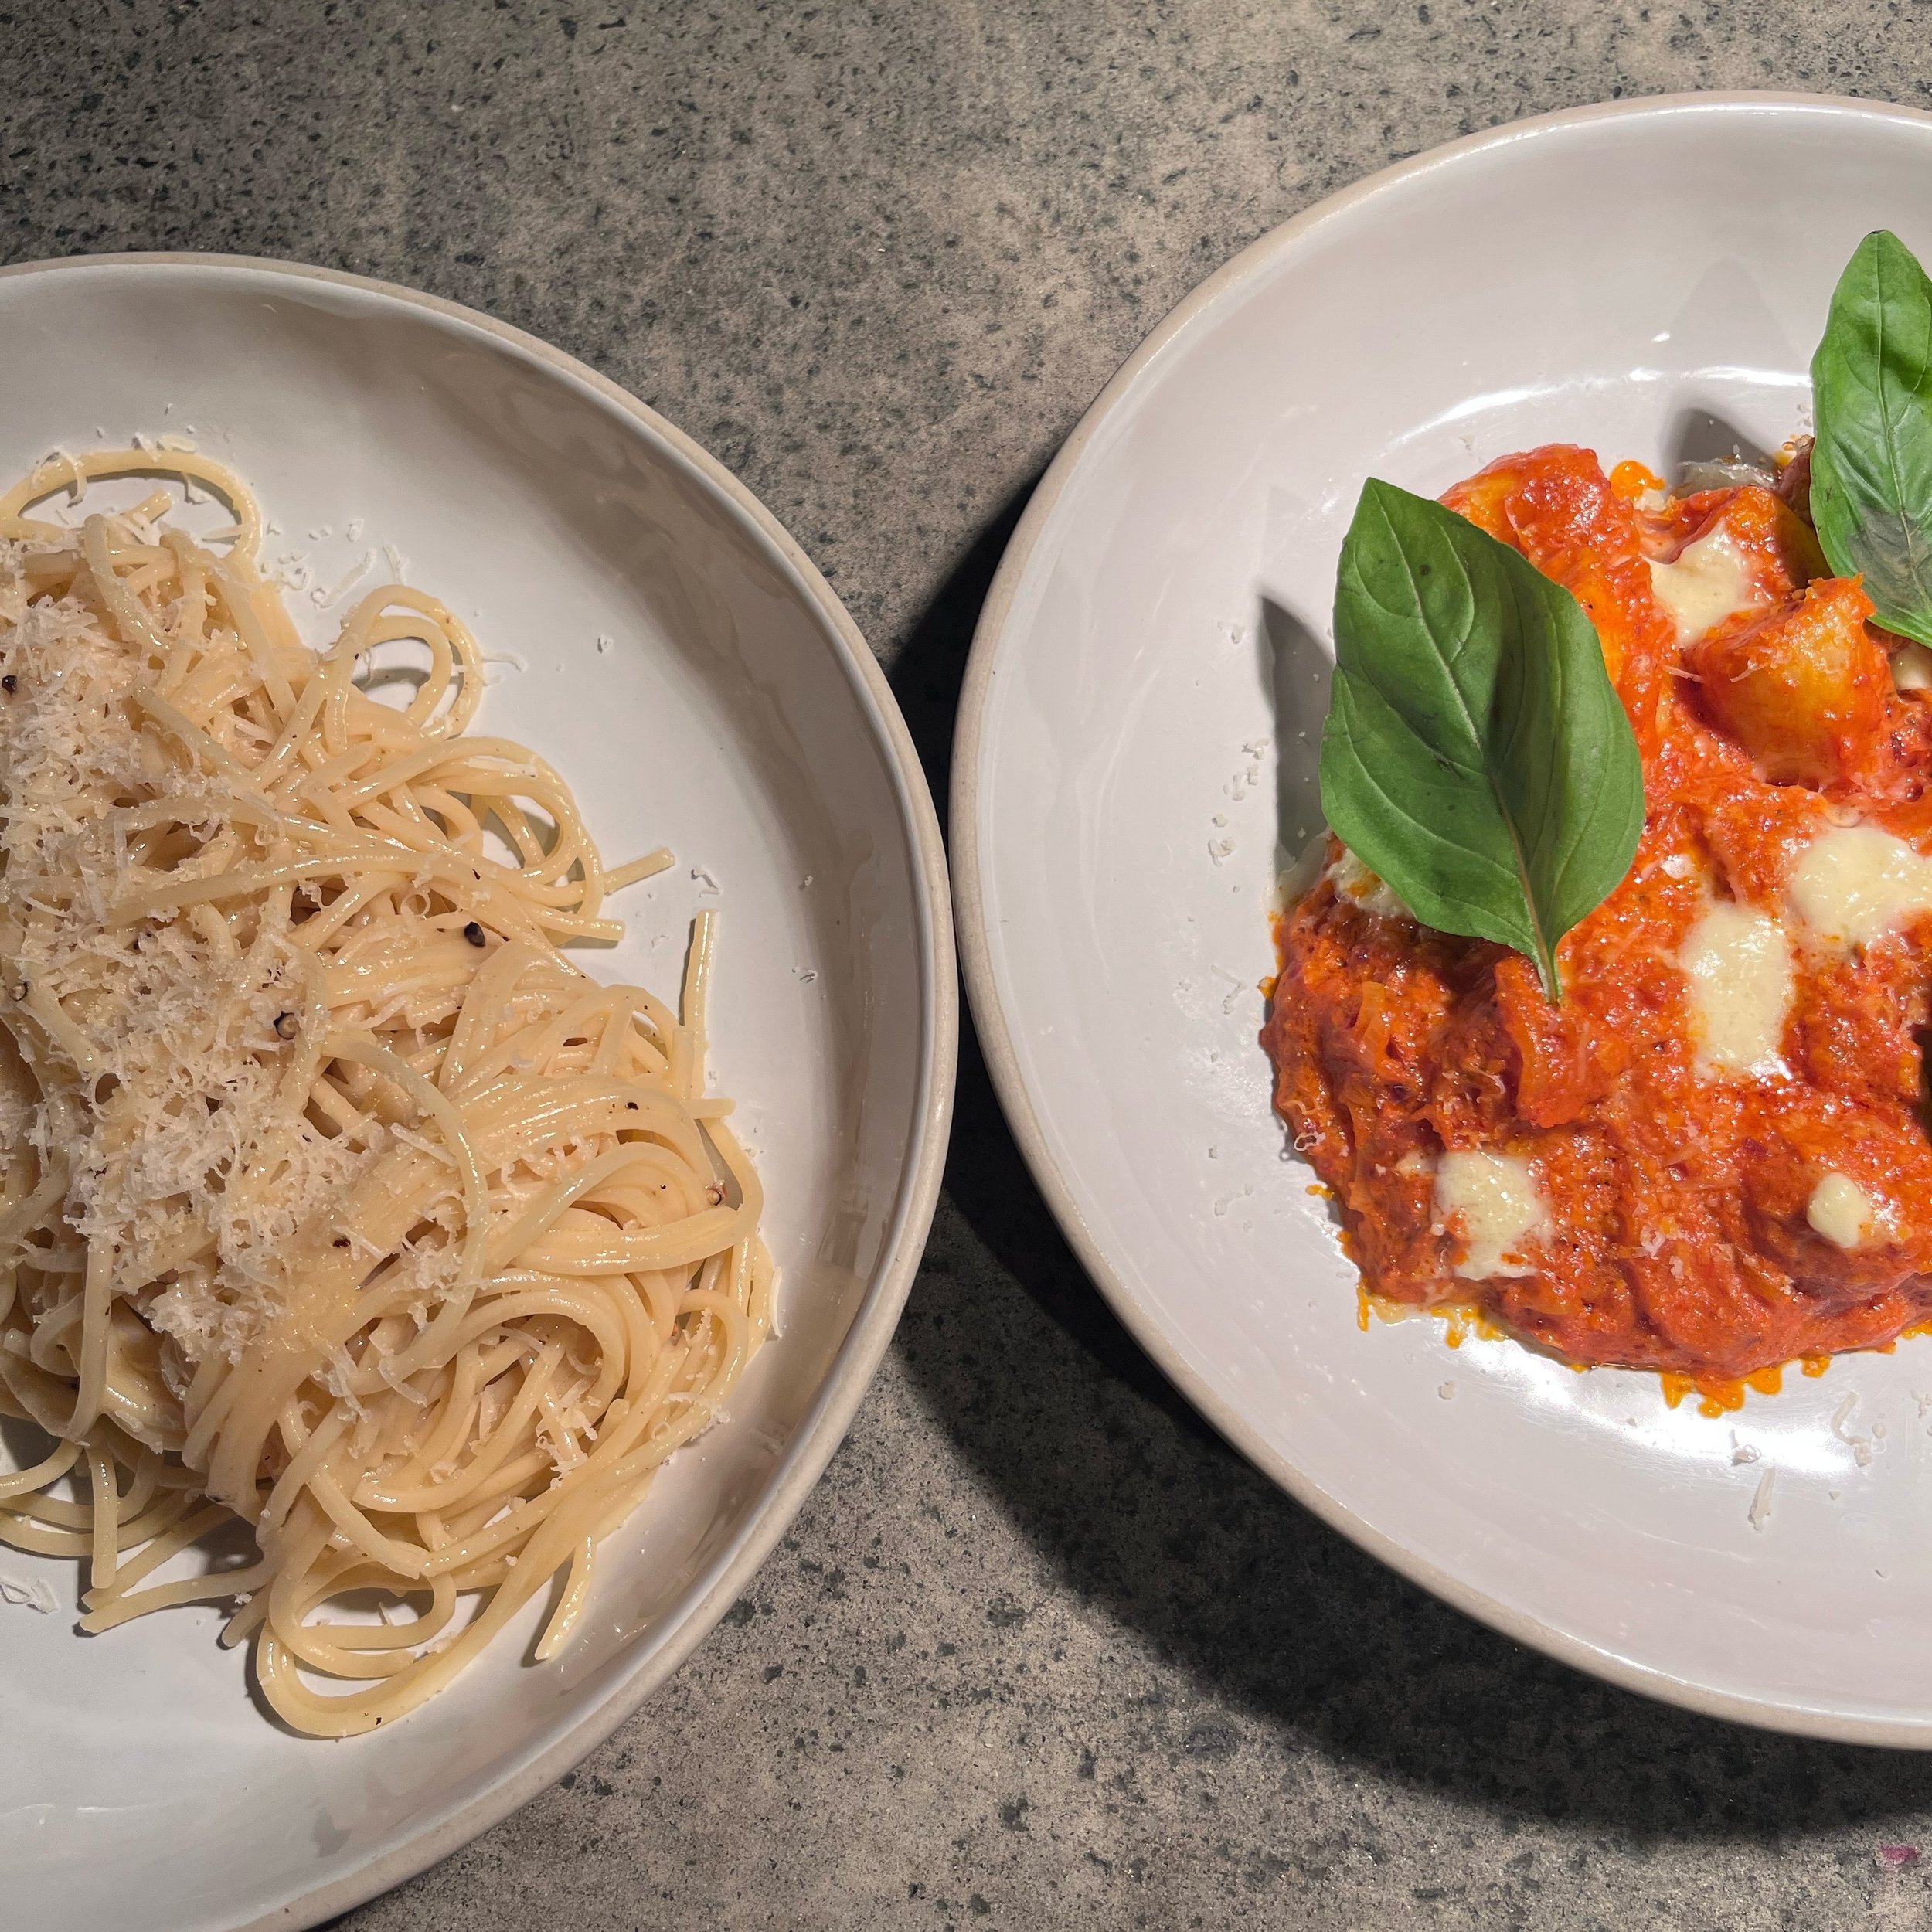 Twist your way into Pasta Night tonight 🍝 

Your choice of a pasta dish + a wine* for $35!

*Dine in only. Select range of wines and tap beers apply. Not available in conjunction with any other deals.